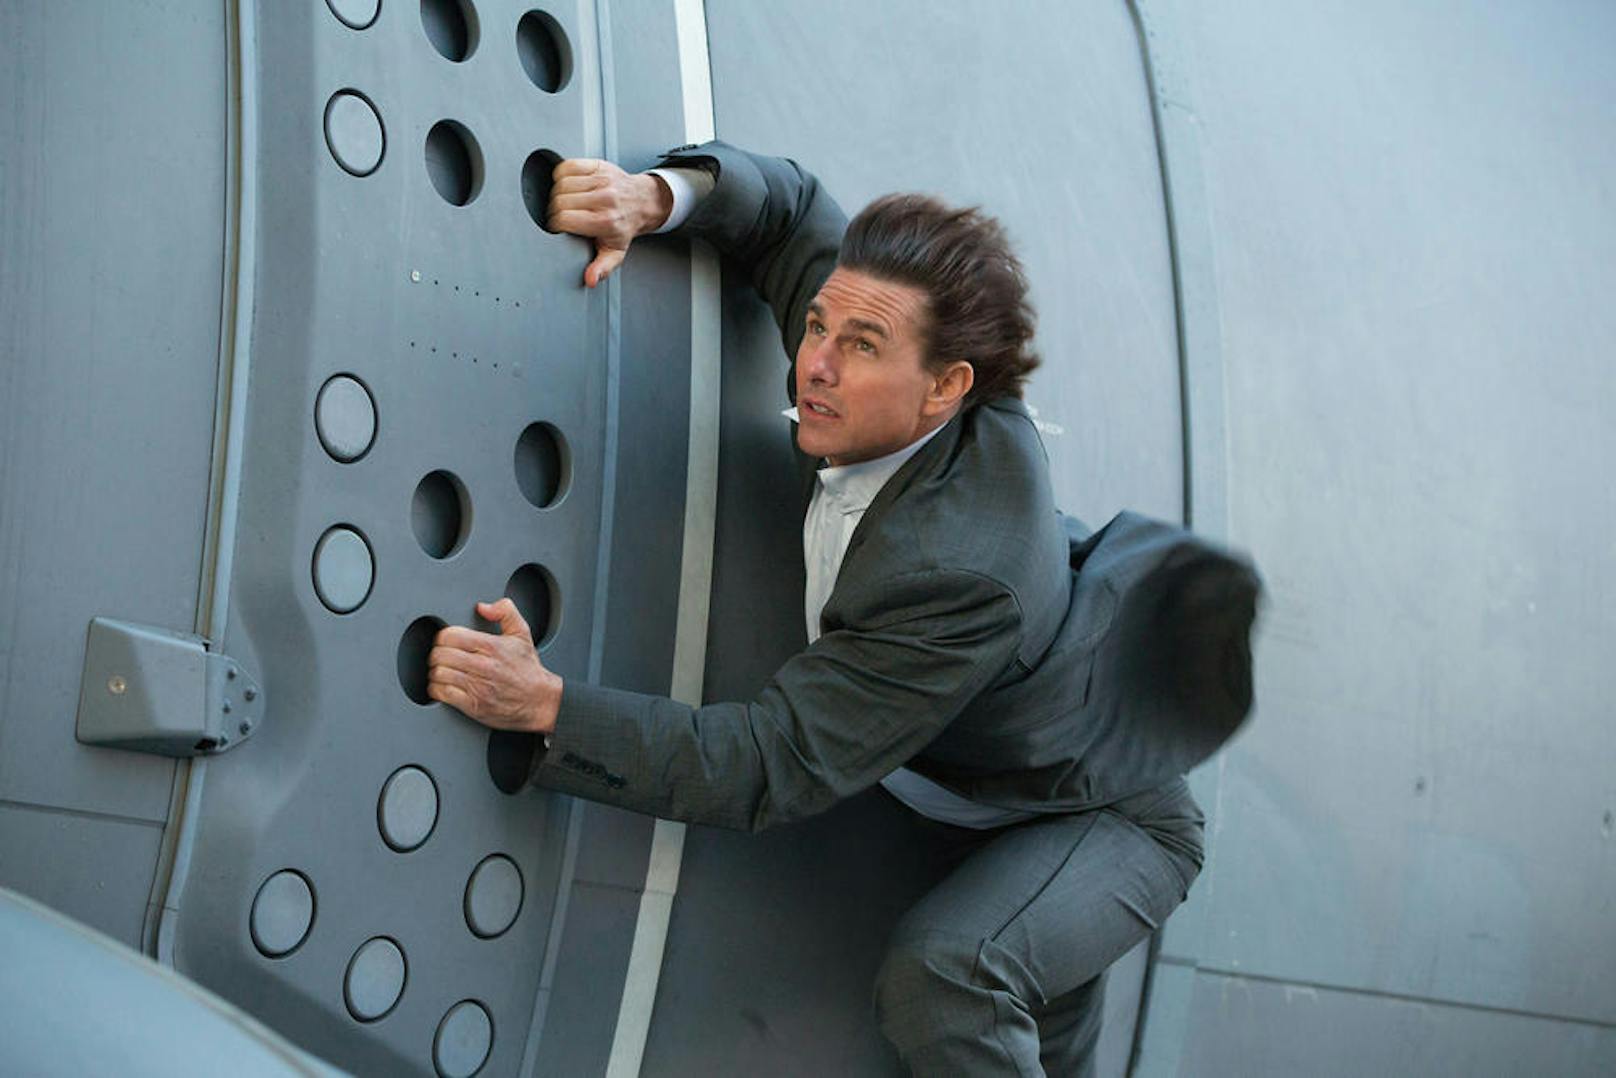 Tom Cruise in "Mission: Impossible - Rogue Nation"